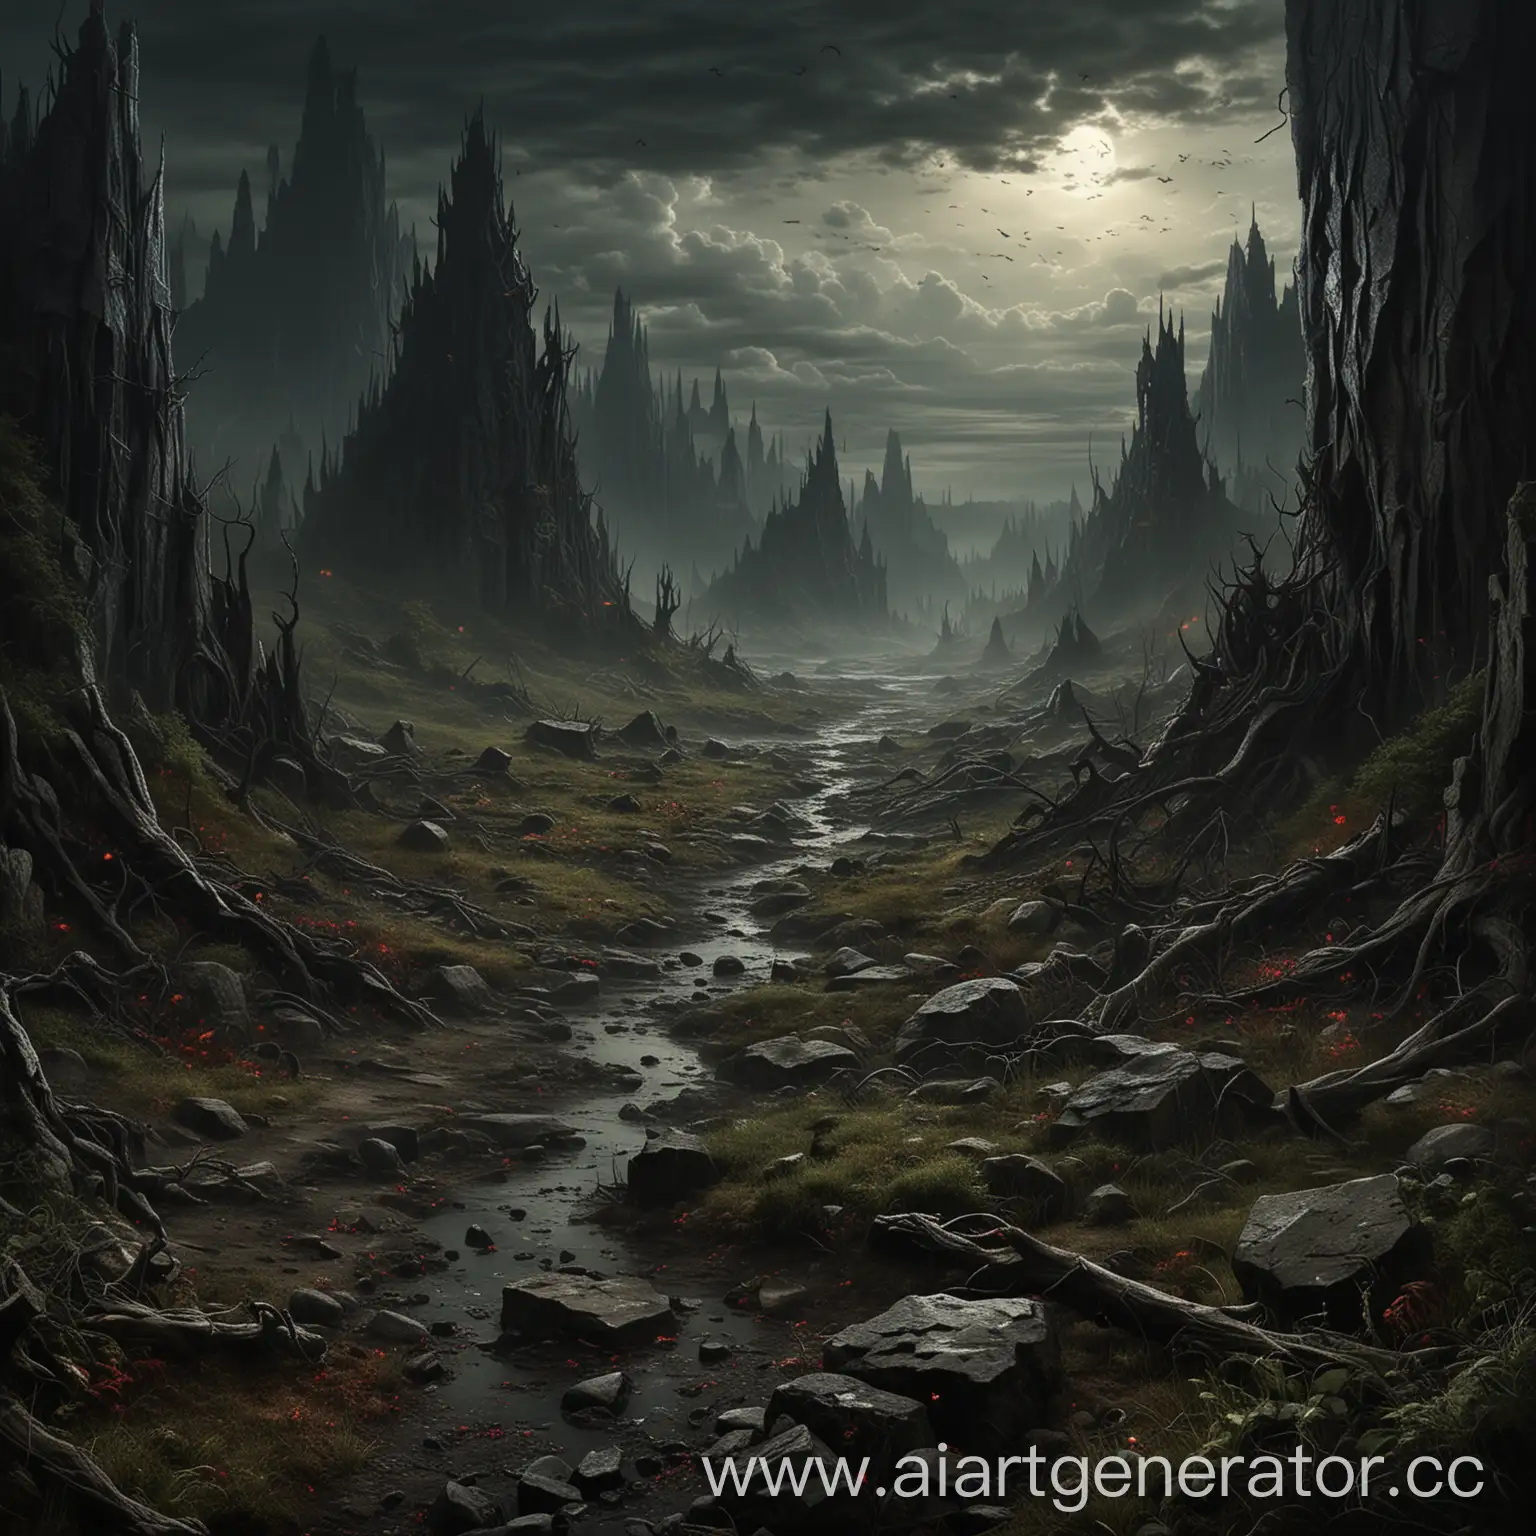 Mysterious-Landscape-with-Evil-Presence